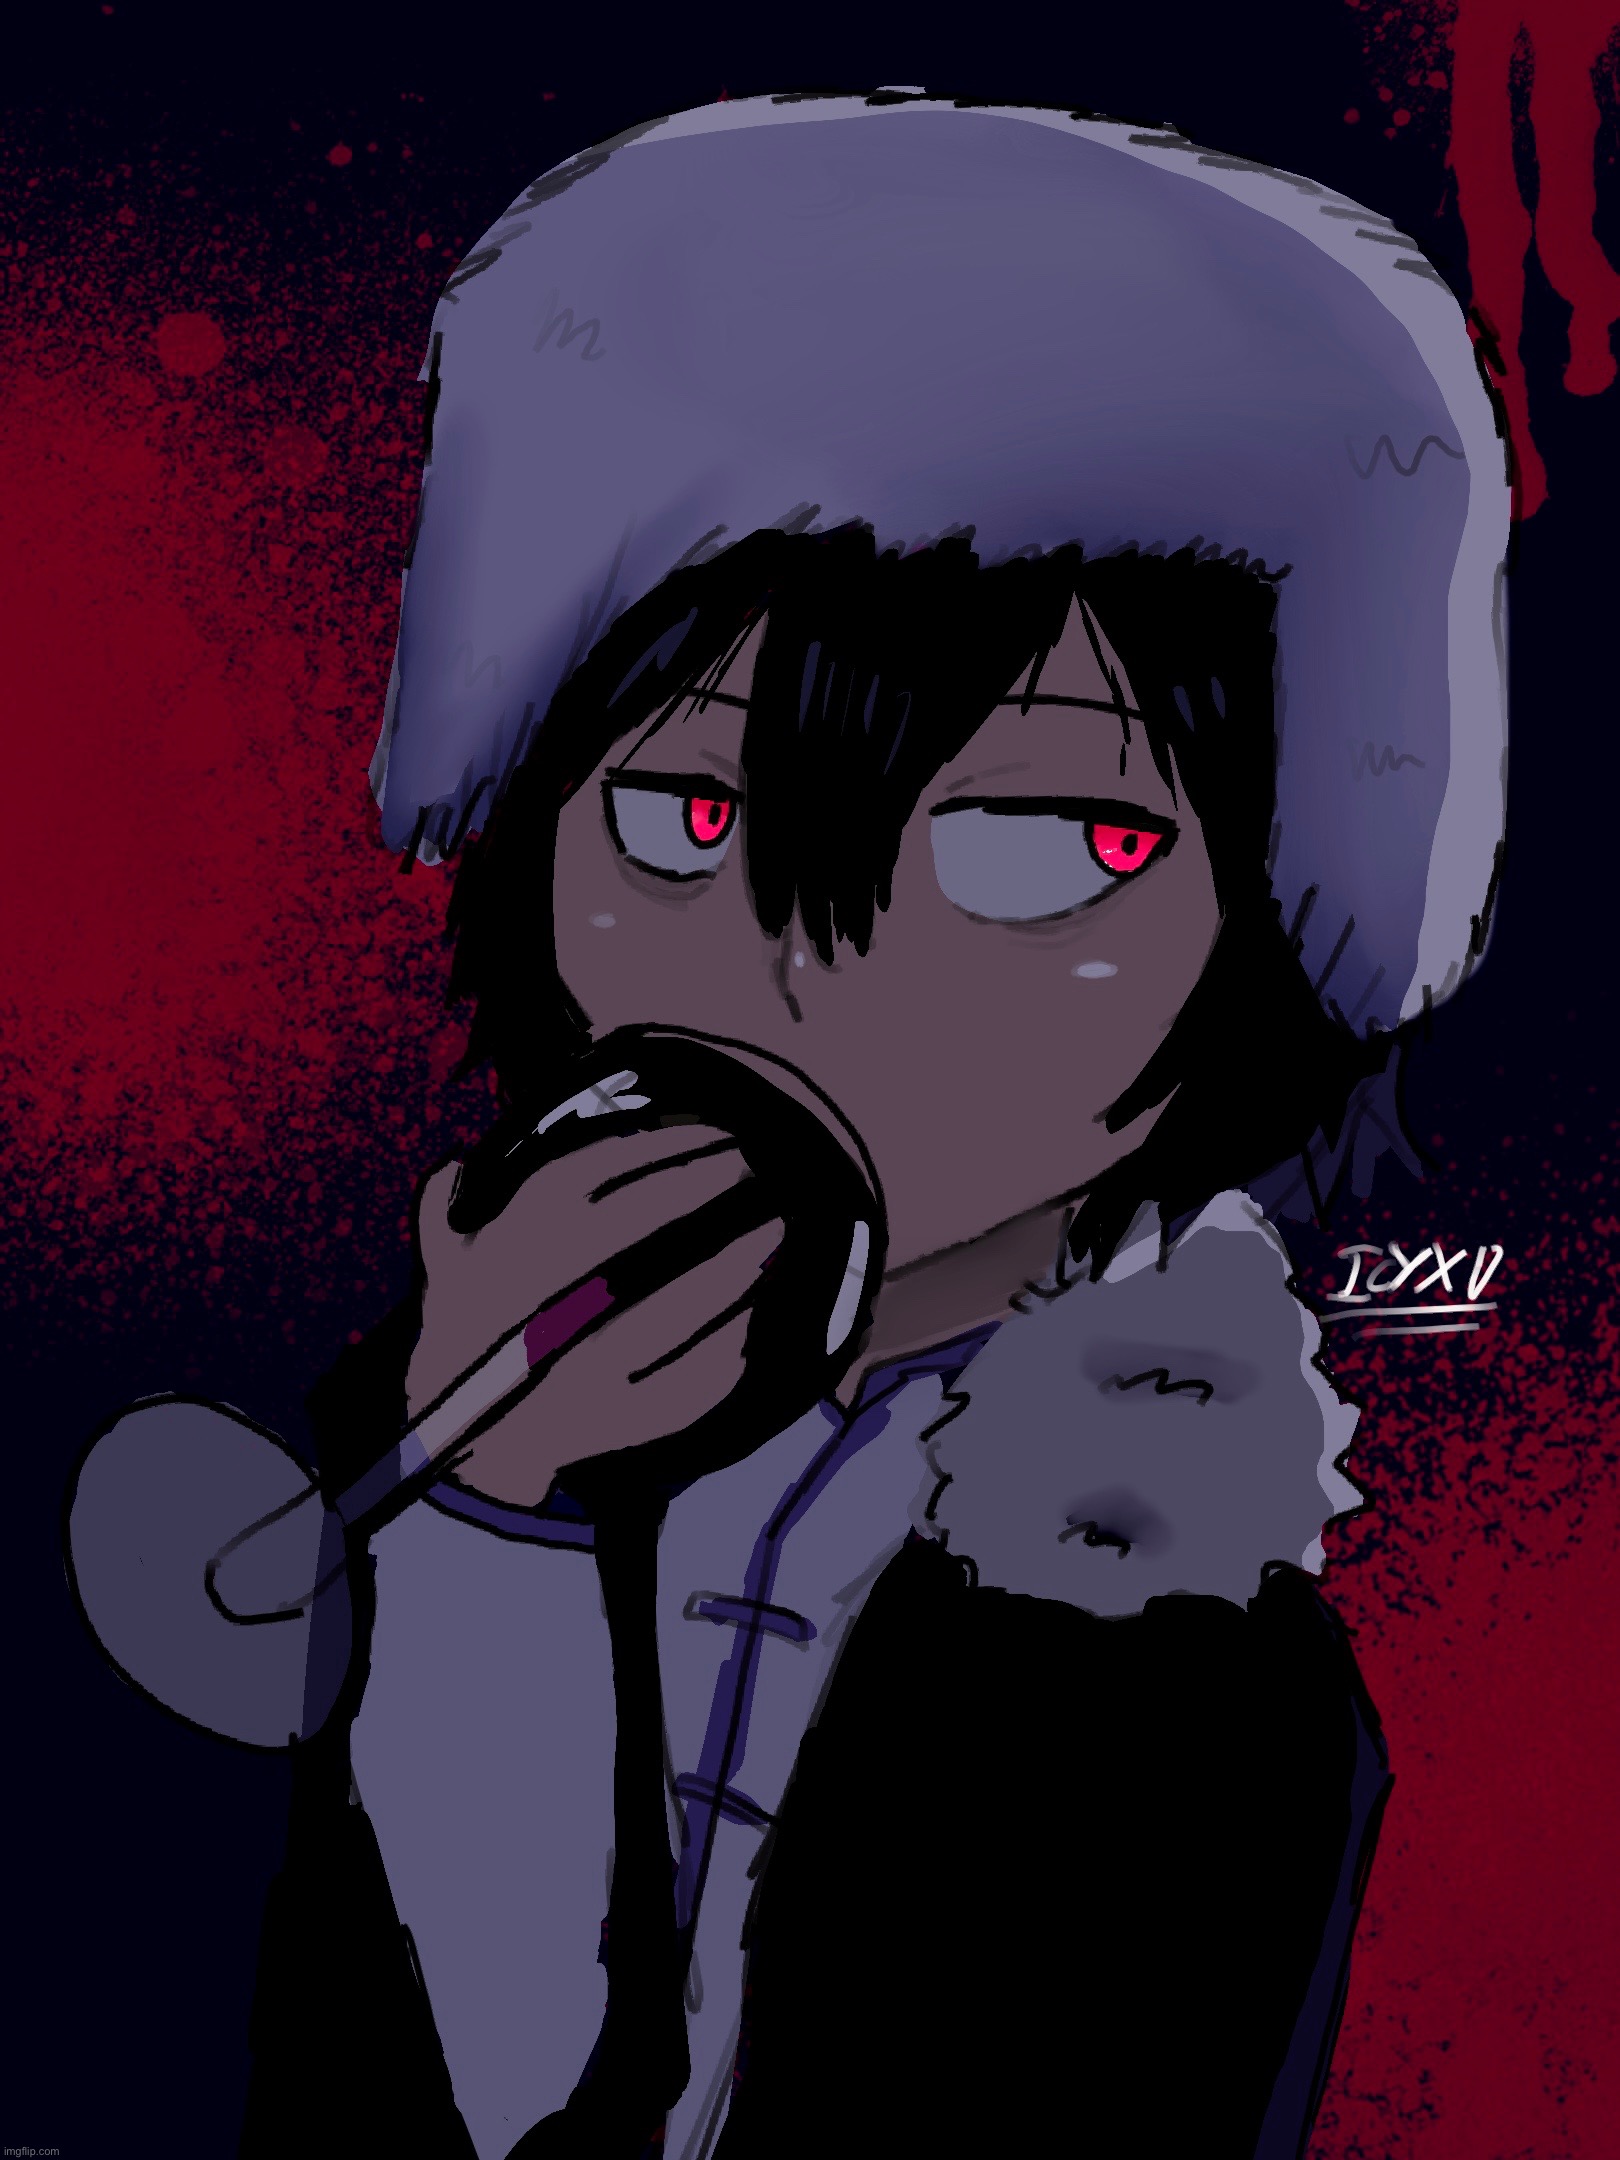 Fyodor Dostoevsky | image tagged in fyodor dostoevsky,bungo stray dogs,anime,russian,blood | made w/ Imgflip meme maker